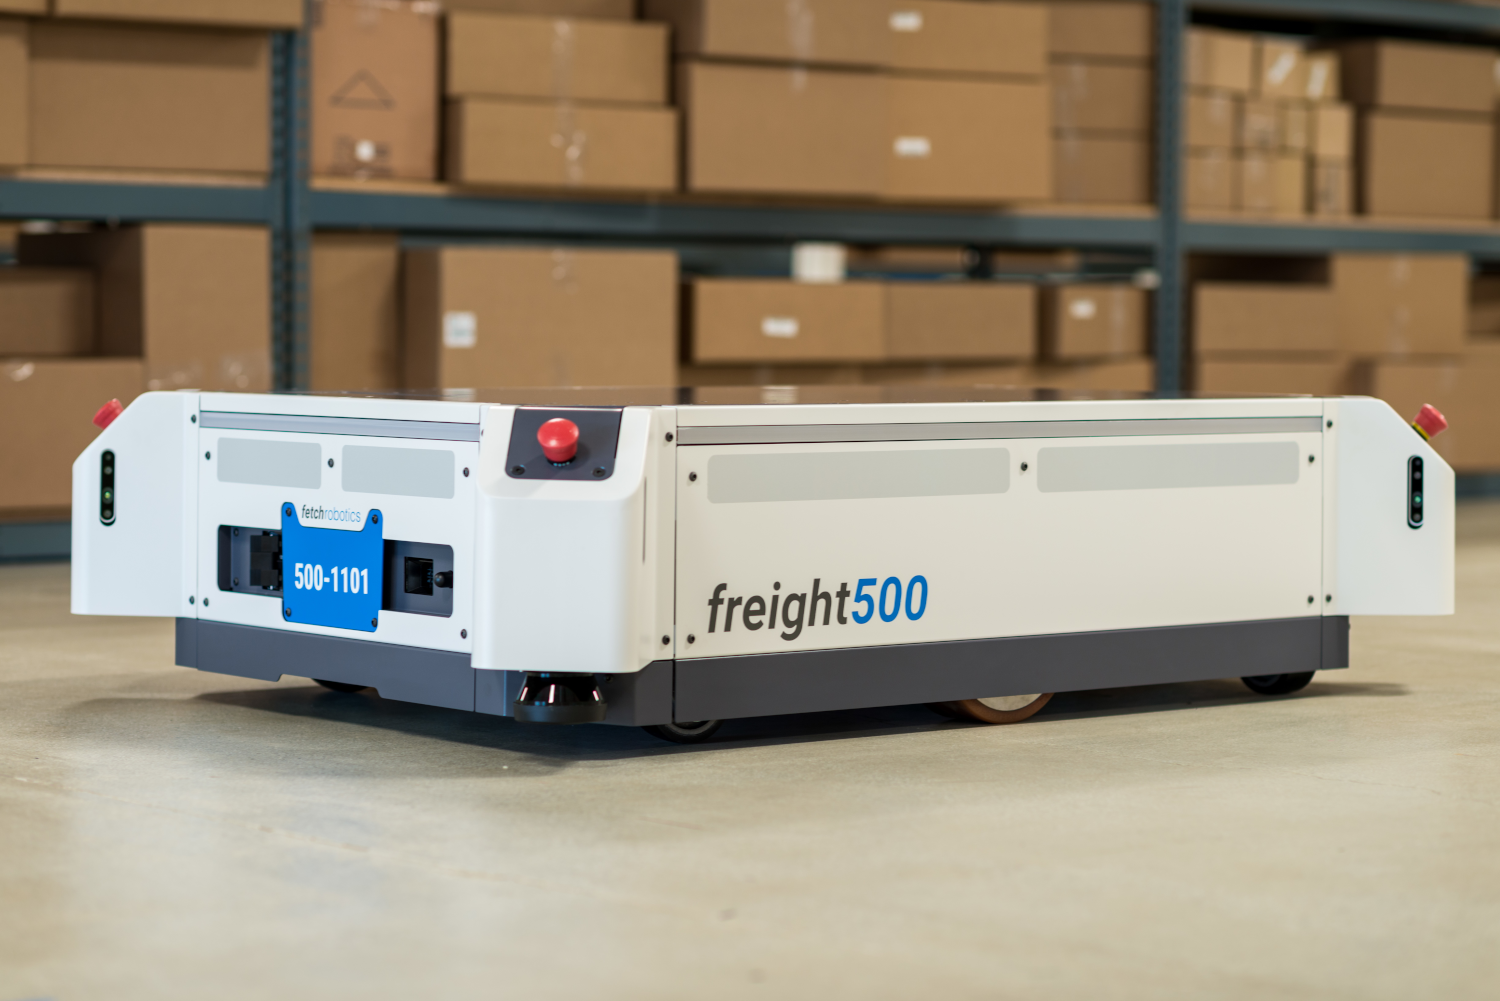 Fetch Freight500 AMR in warehouse